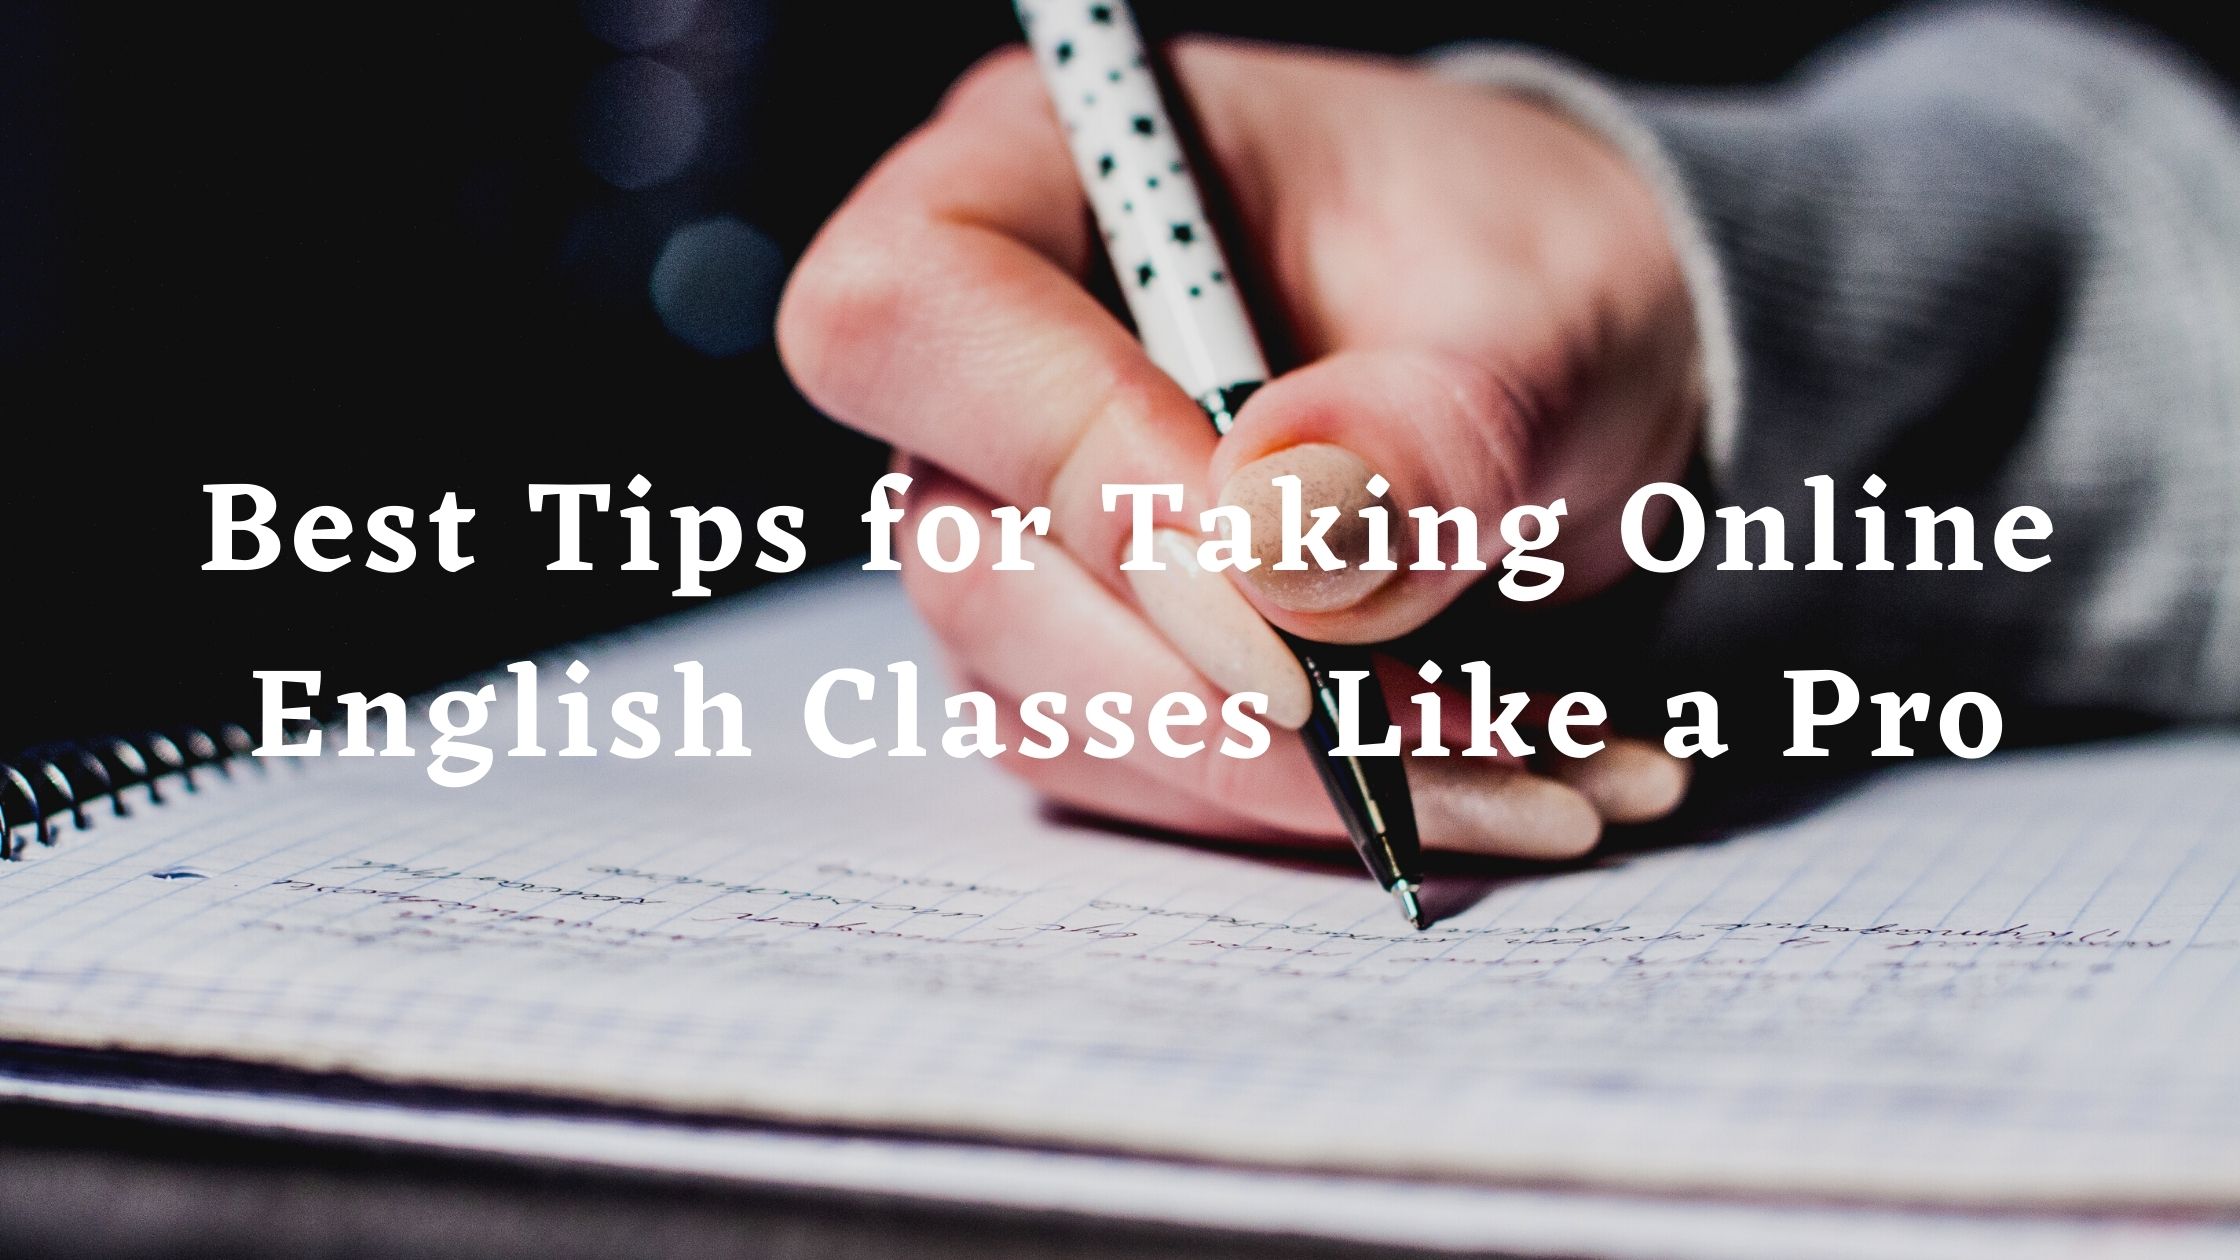 Best Tips for Taking Online English Classes Like a Pro